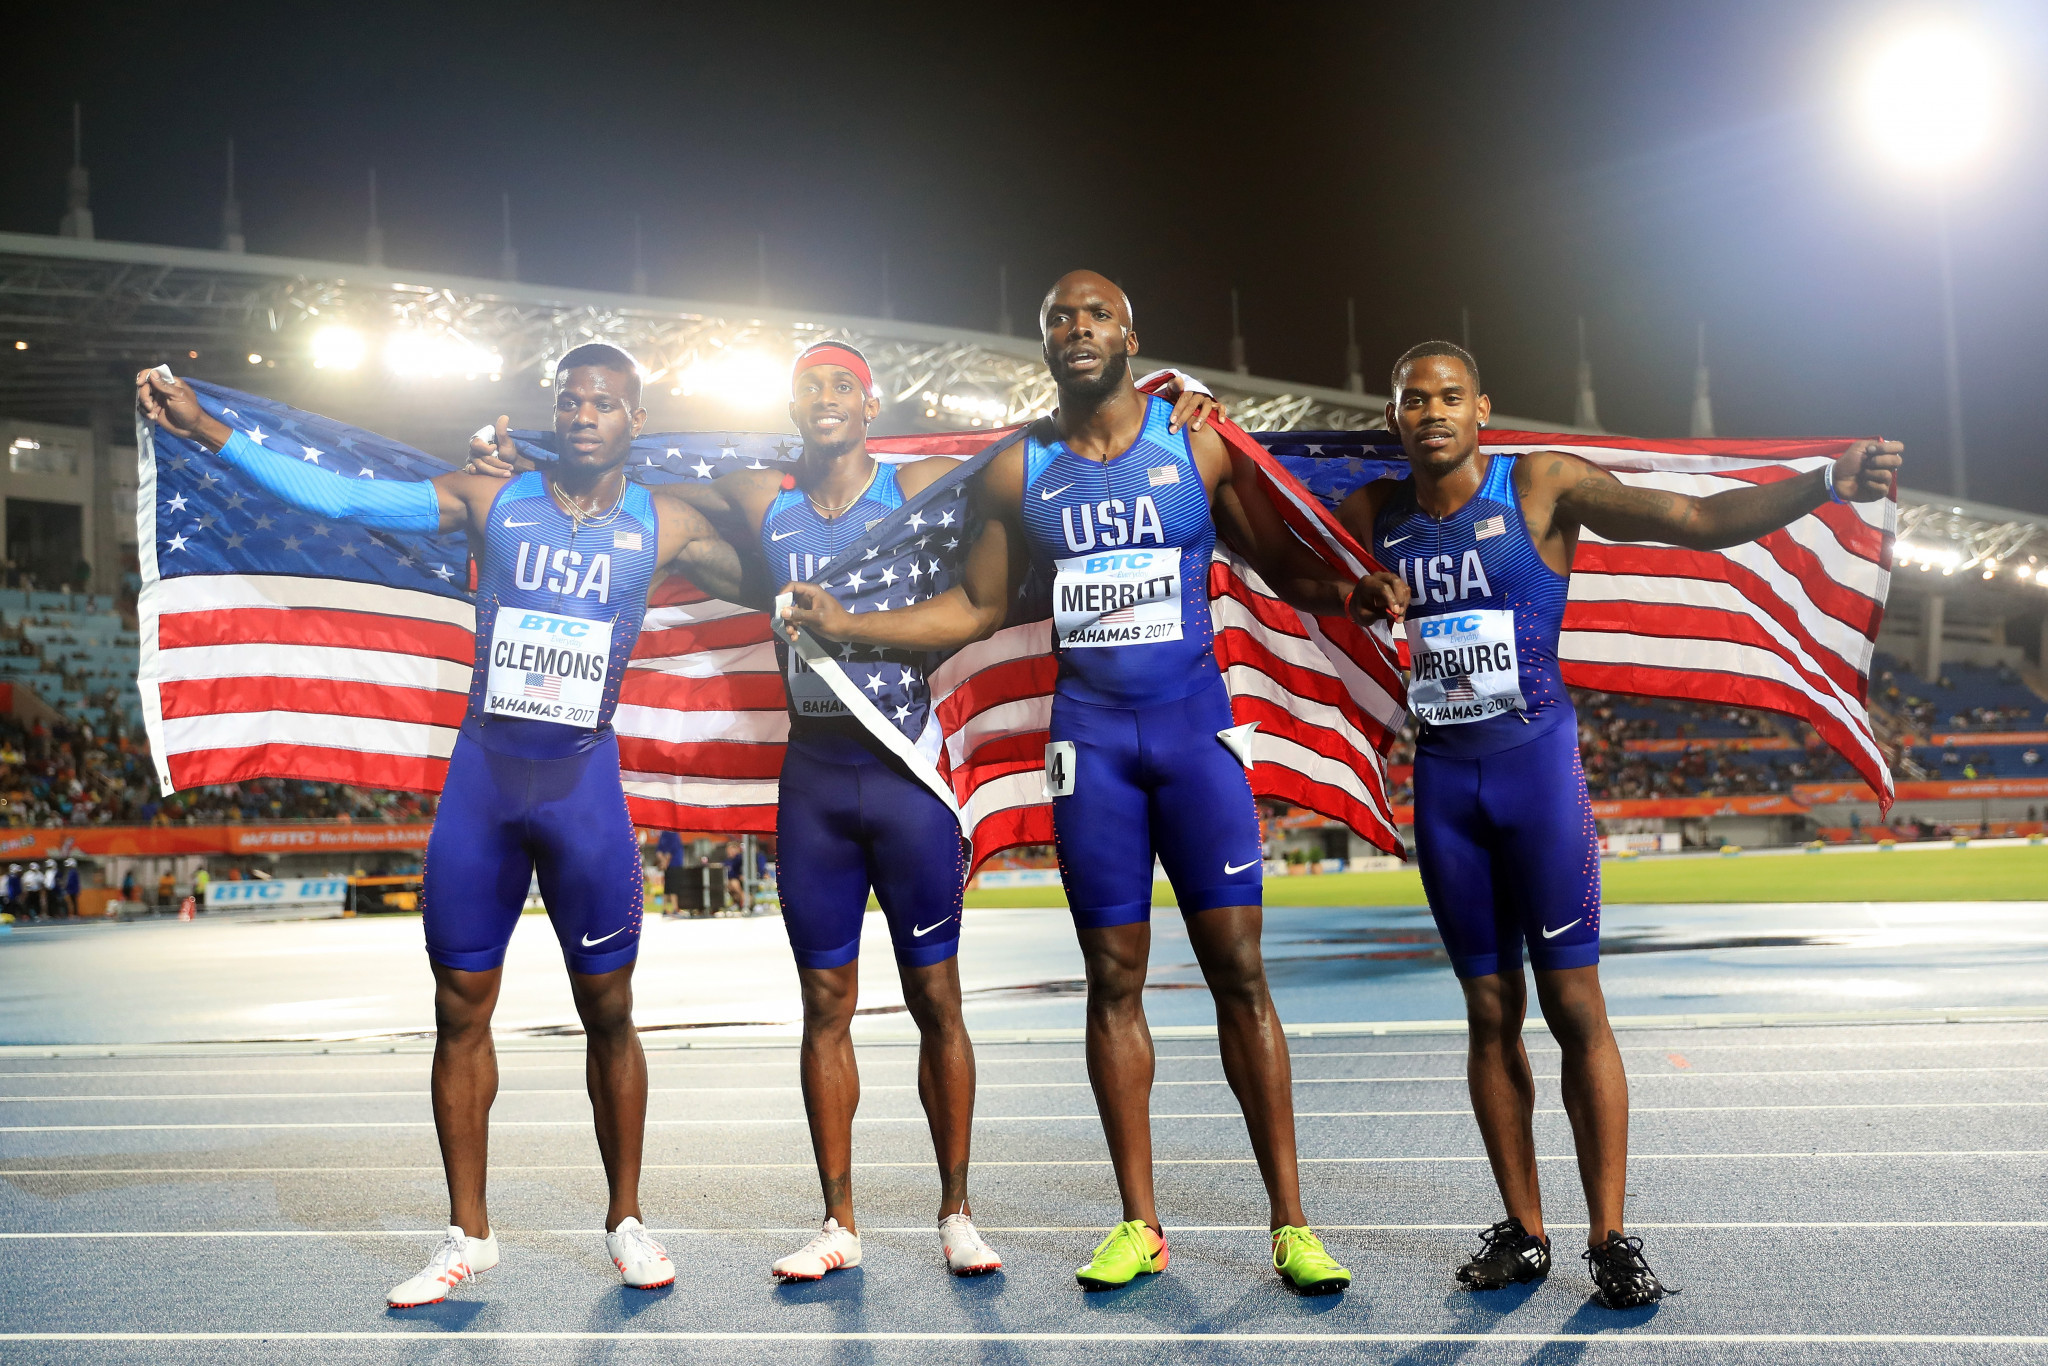 United States seeking to maintain hold on IAAF World Relays as new mixed events feature in Yokohama